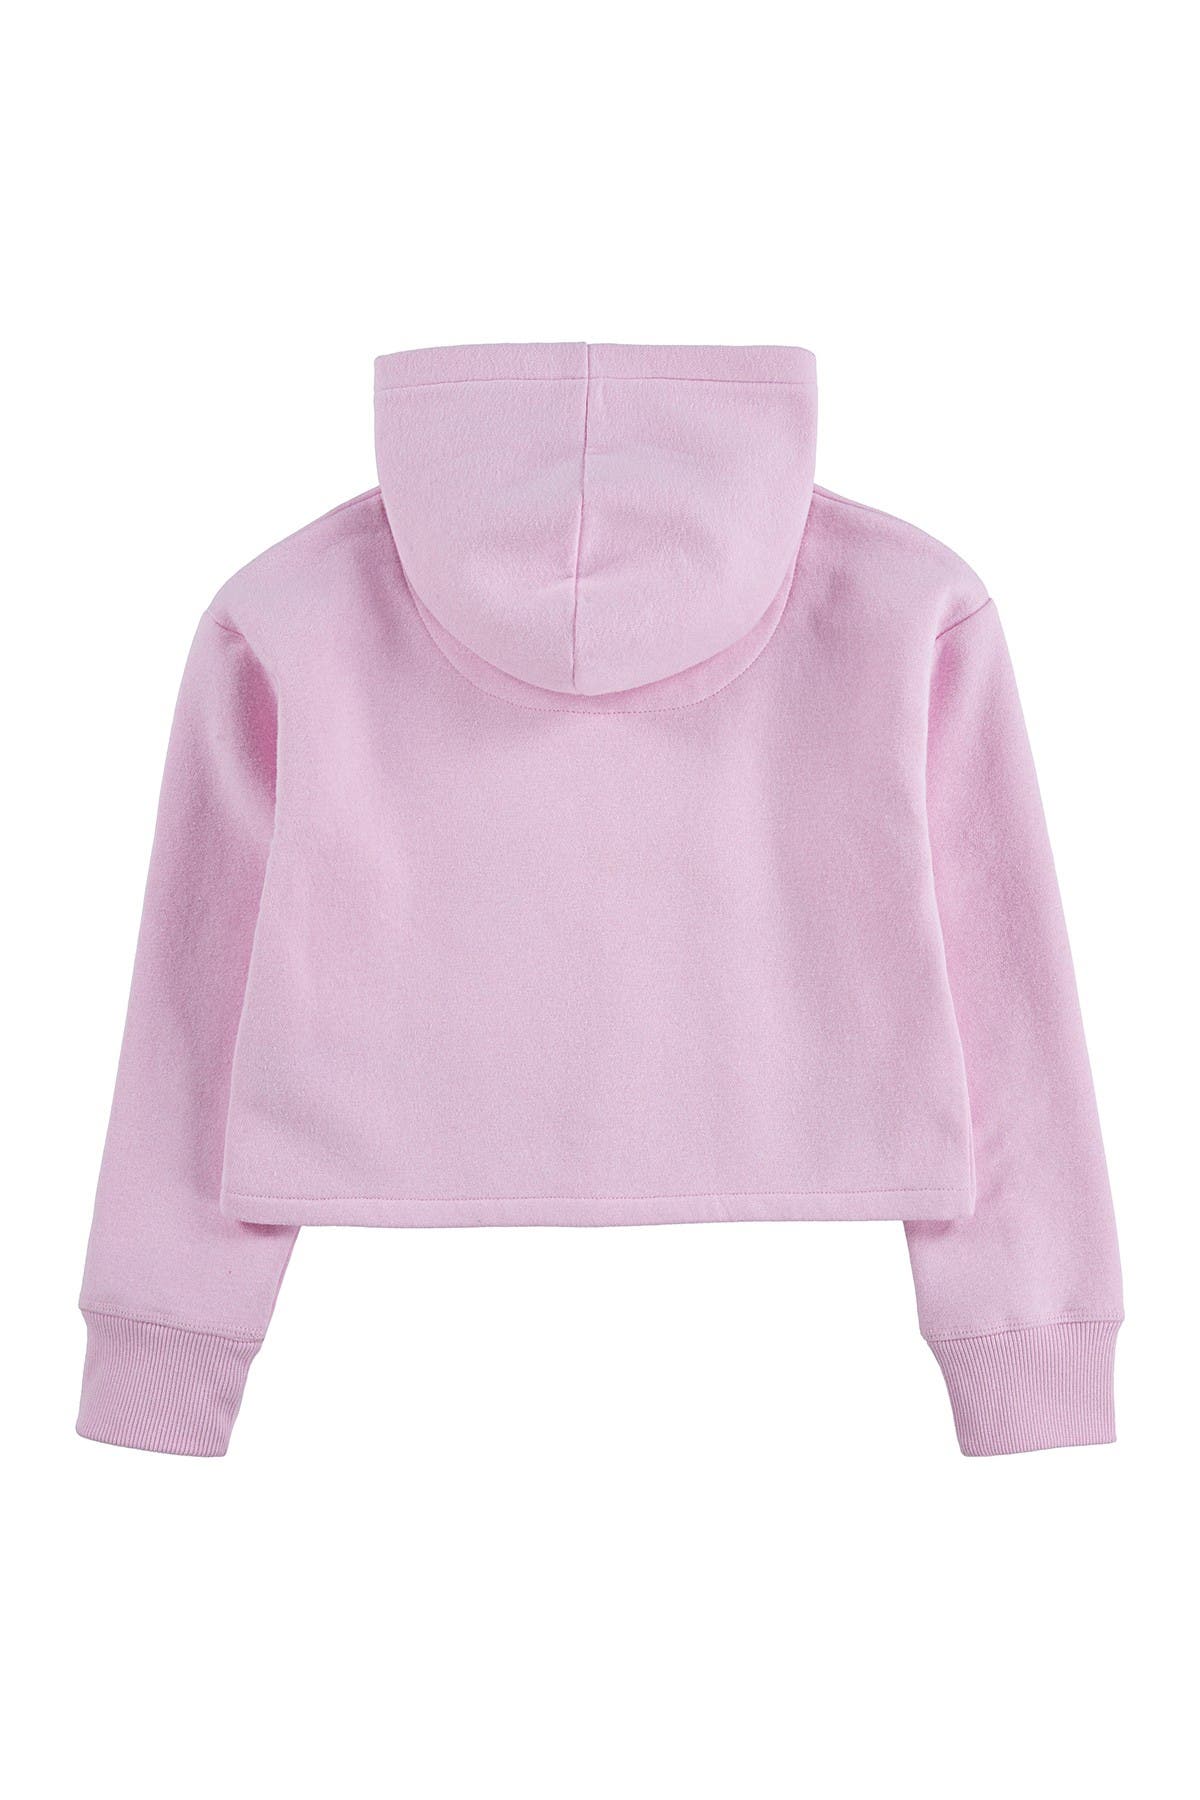 Levi's Kids' Hello Kitty Cropped Hoodie In Light/pastel Pink3